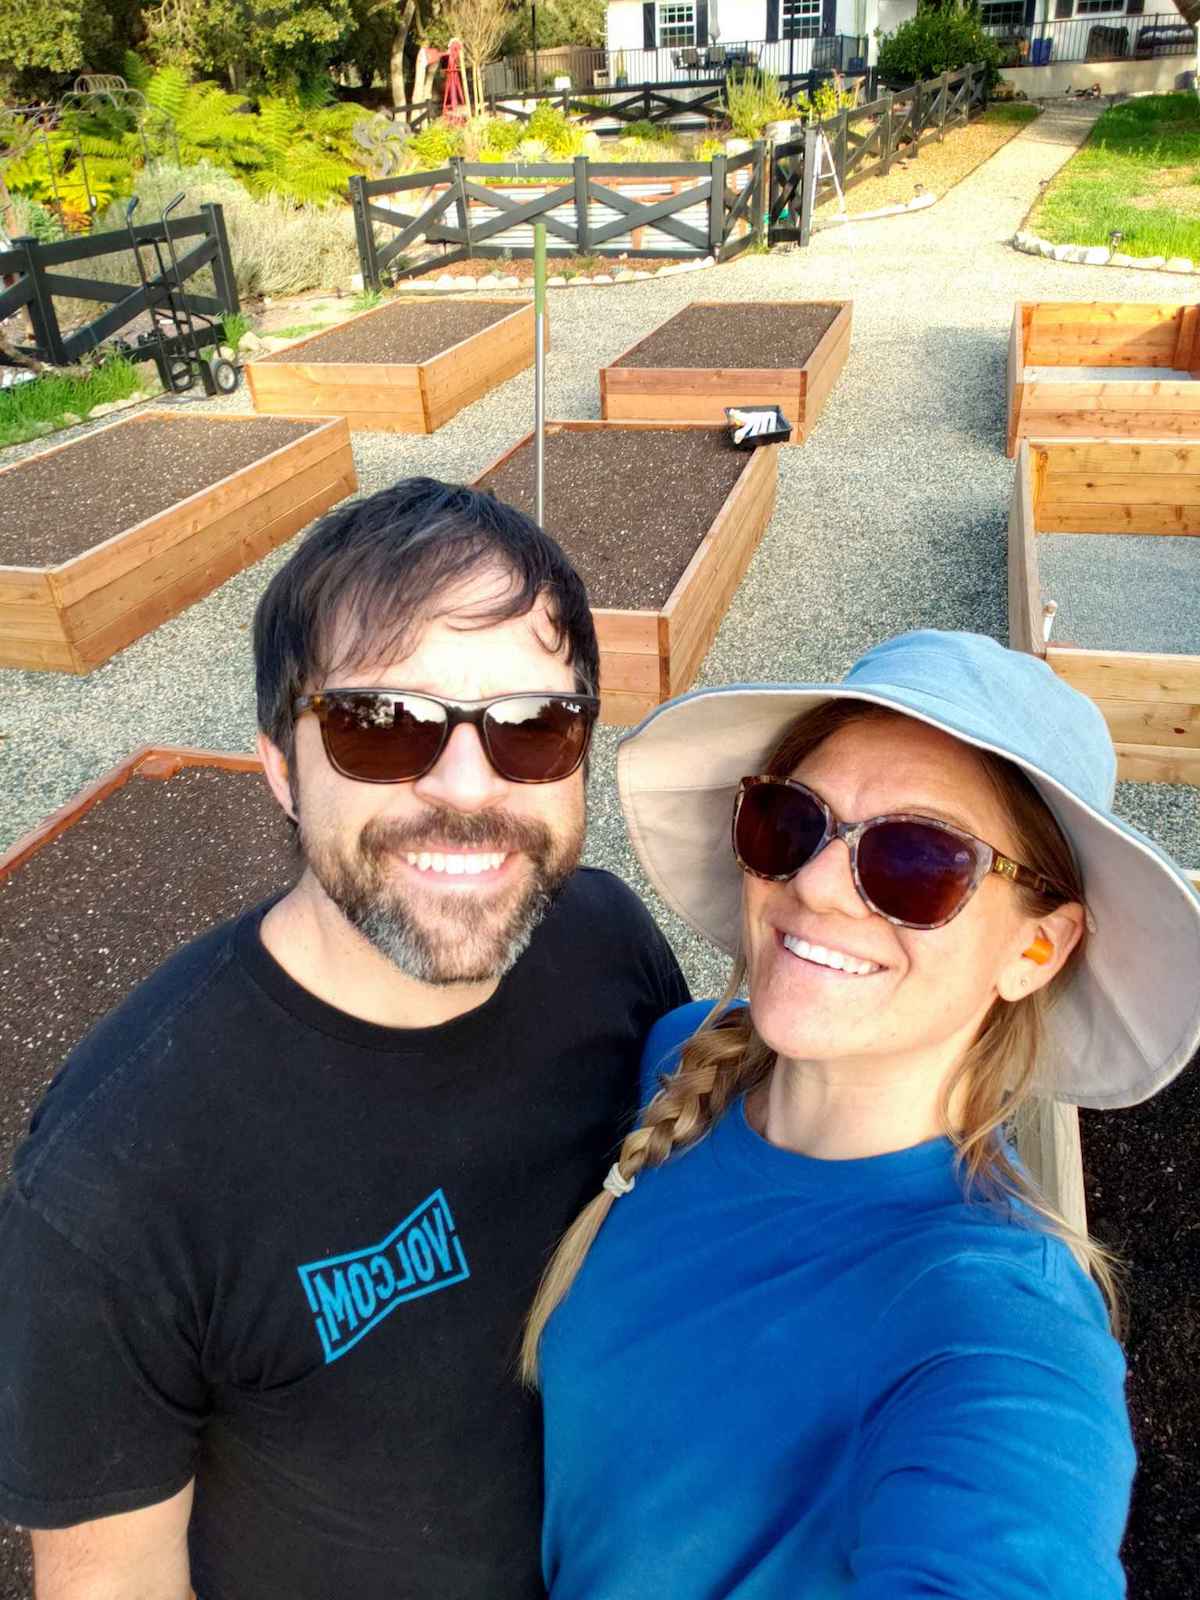 Aaron and Deanna taking a selfie standing in front of their new garden area that is in the process of being created.